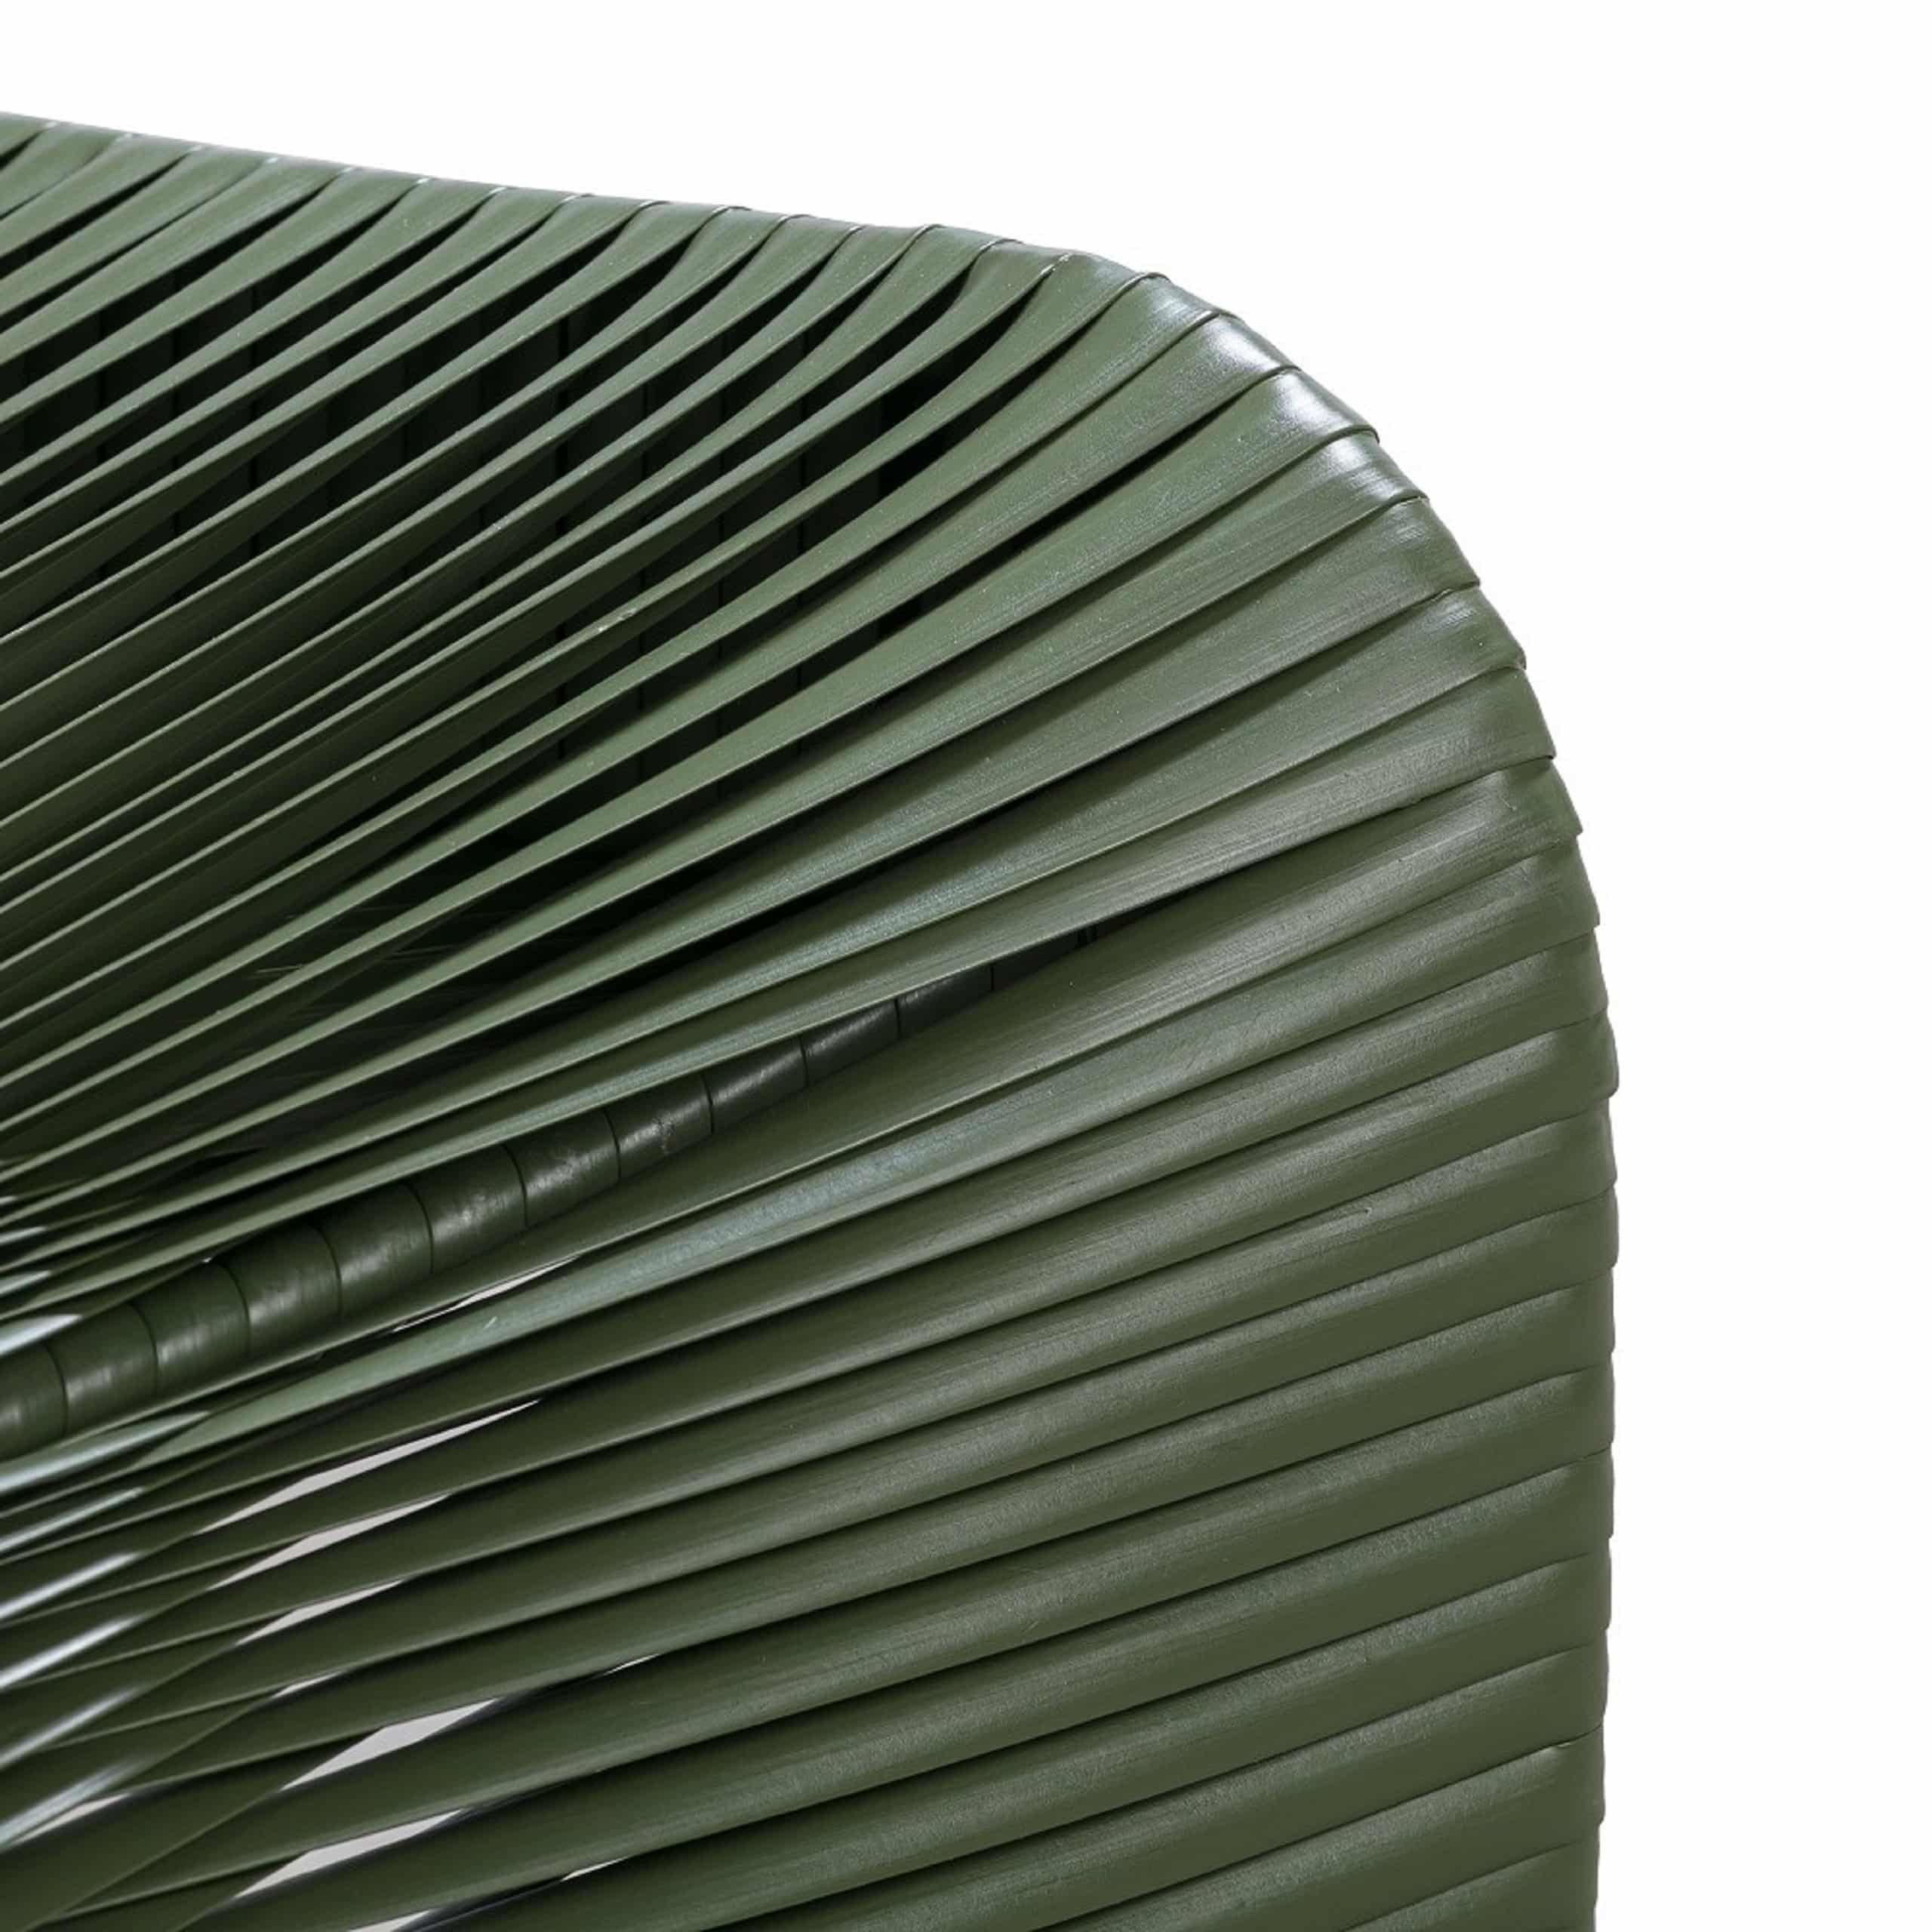 Aviable-finishesOlive Green PVC